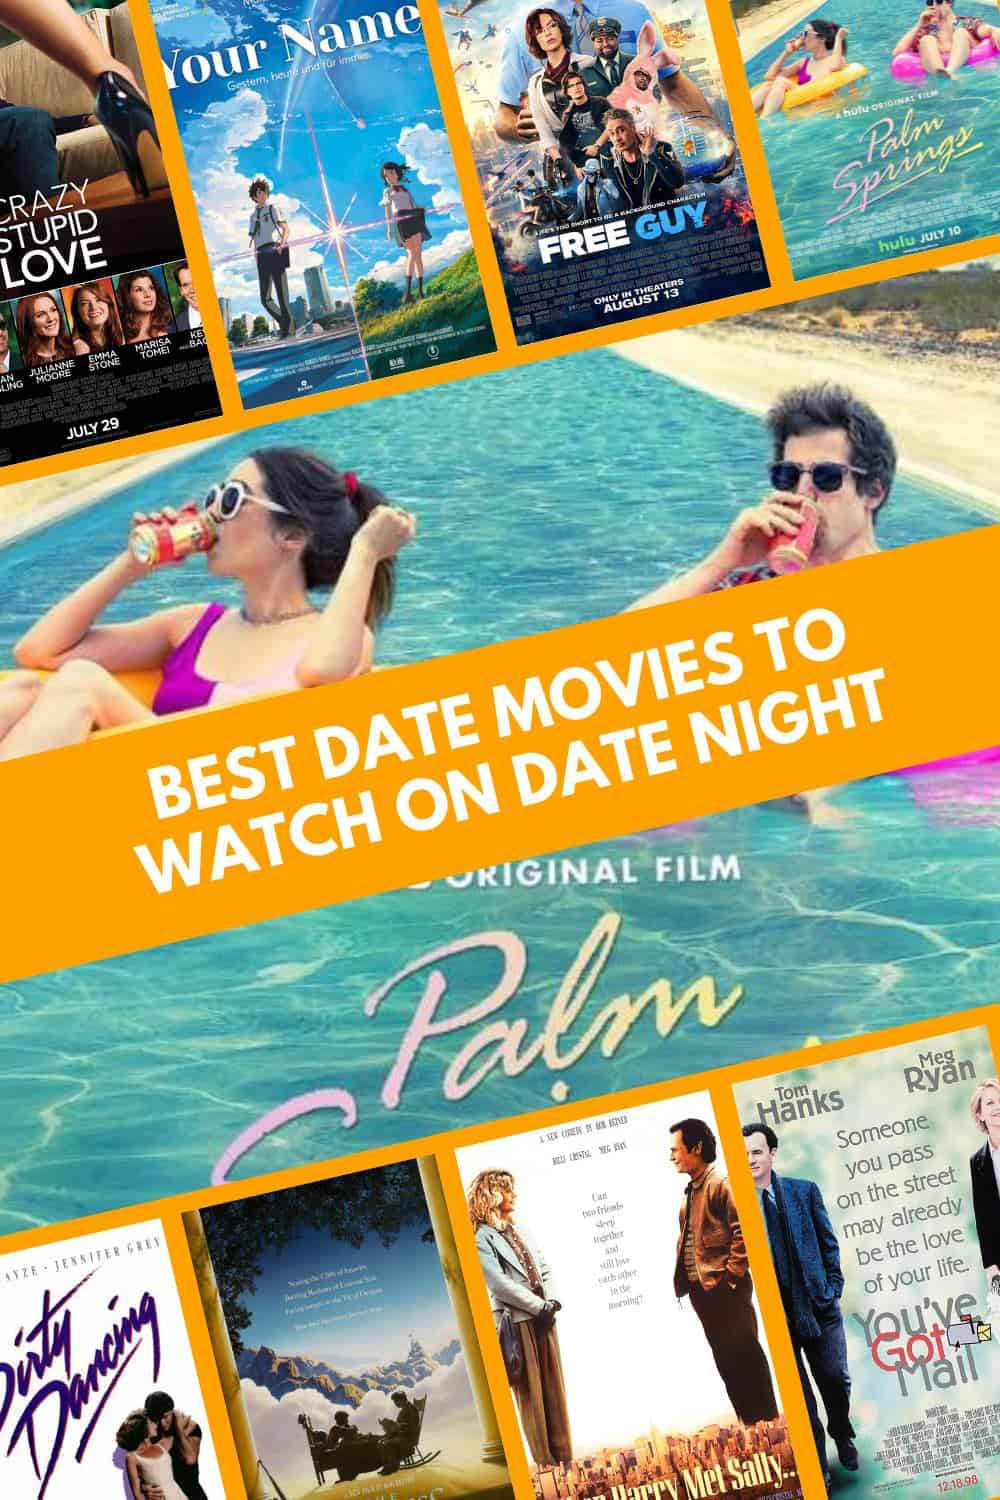 Date Movie to Watch on Date Night